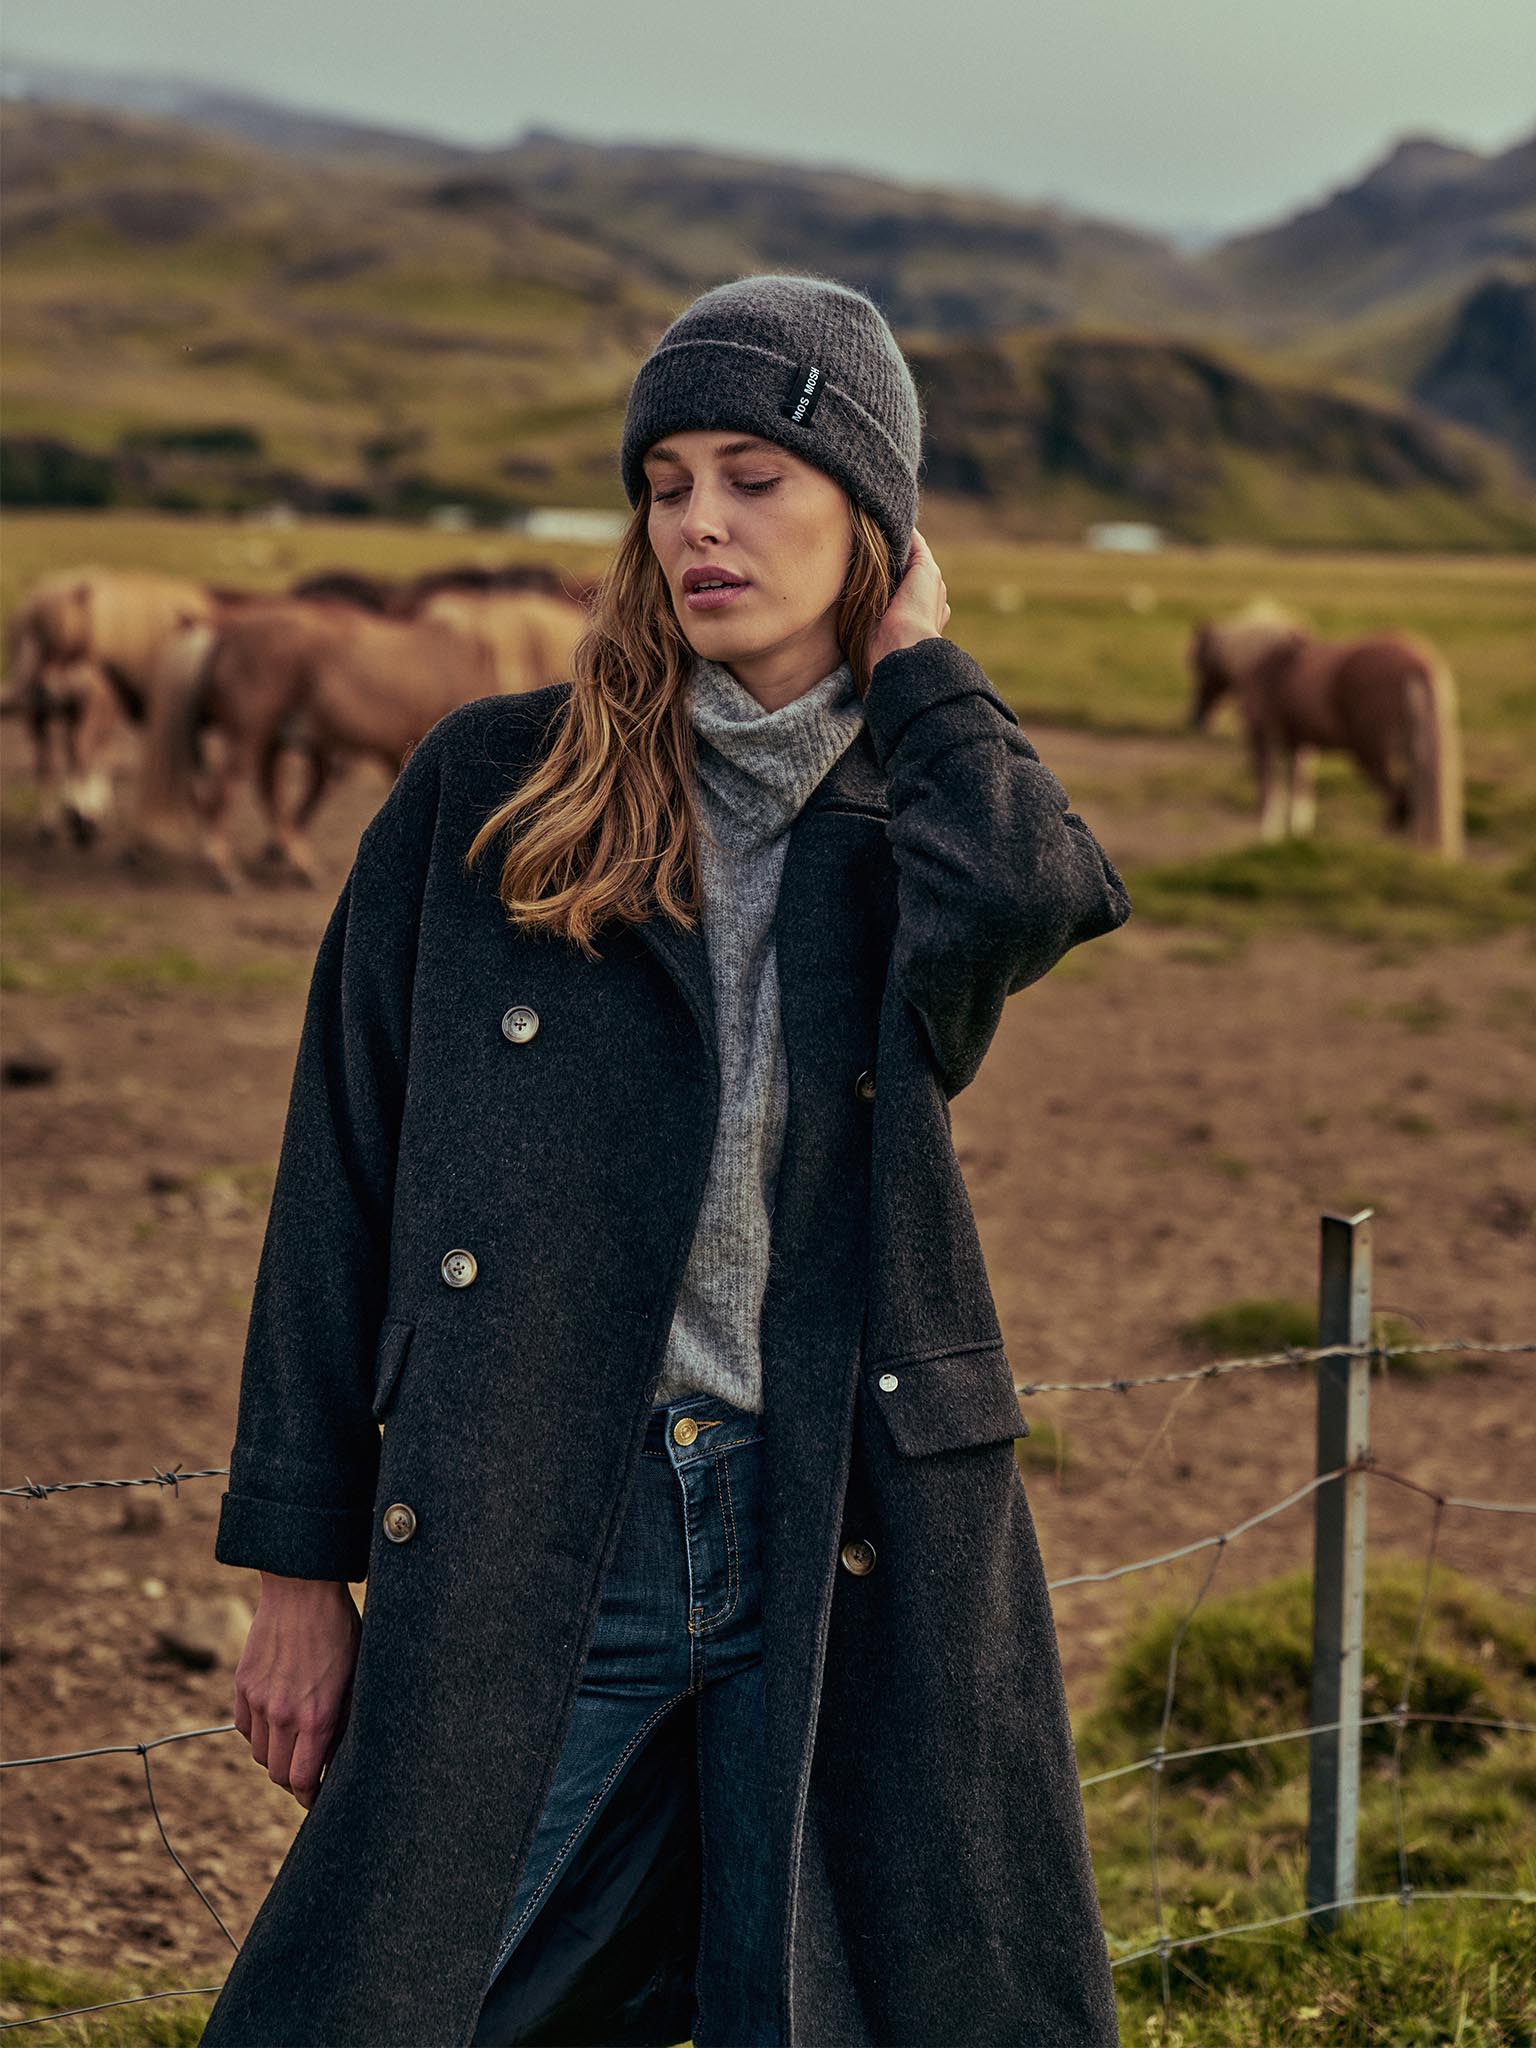 Lady standing in a horse field wearing warm clothes including Mos Mosh Venice Wool Pavement Coat